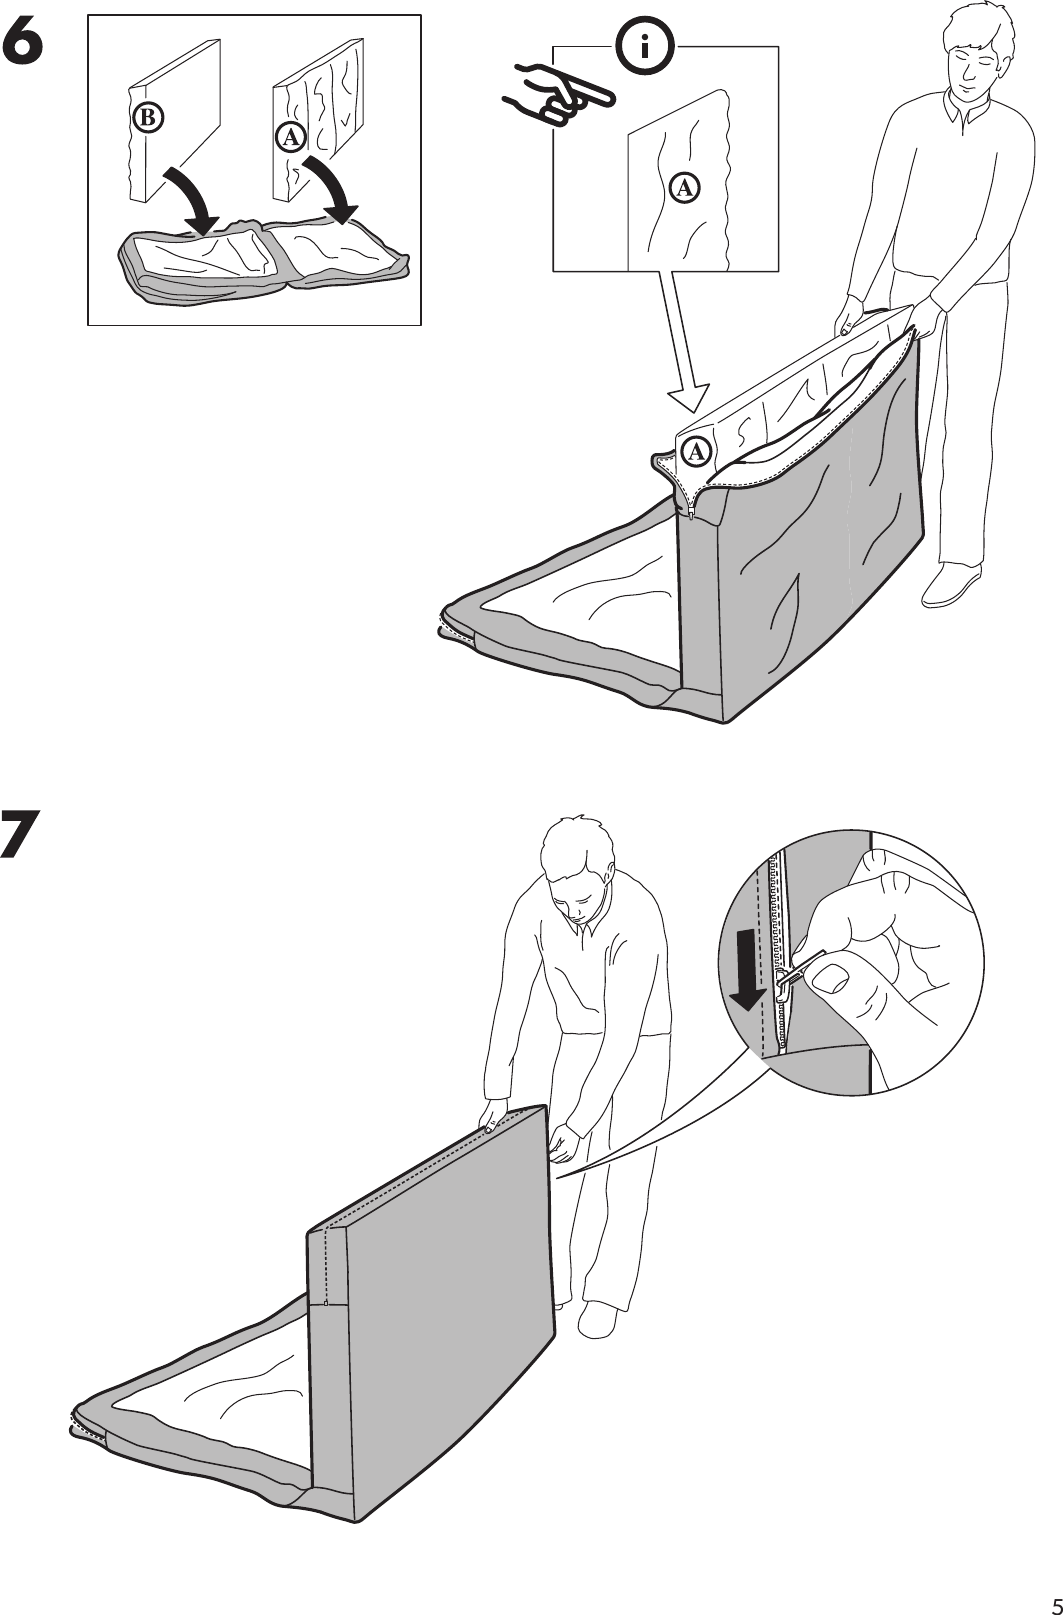 Page 5 of 12 - Ikea Ikea-Hagalund-Sofa-Bed-Cover-Assembly-Instruction